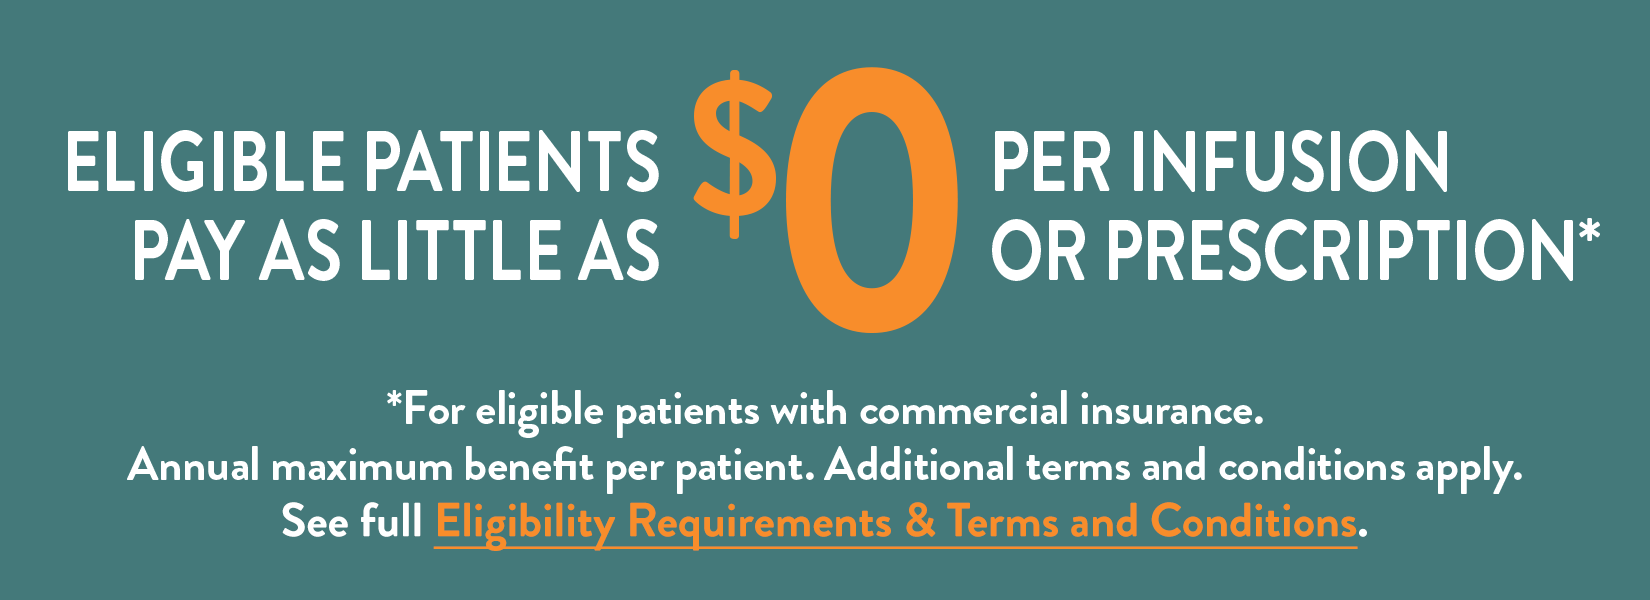 Eligible patients pay as little as $0 per infusion or prescription. For eligible patients with commercial insurance. Annual maximum benefit per patient. Additional terms and conditions apply.